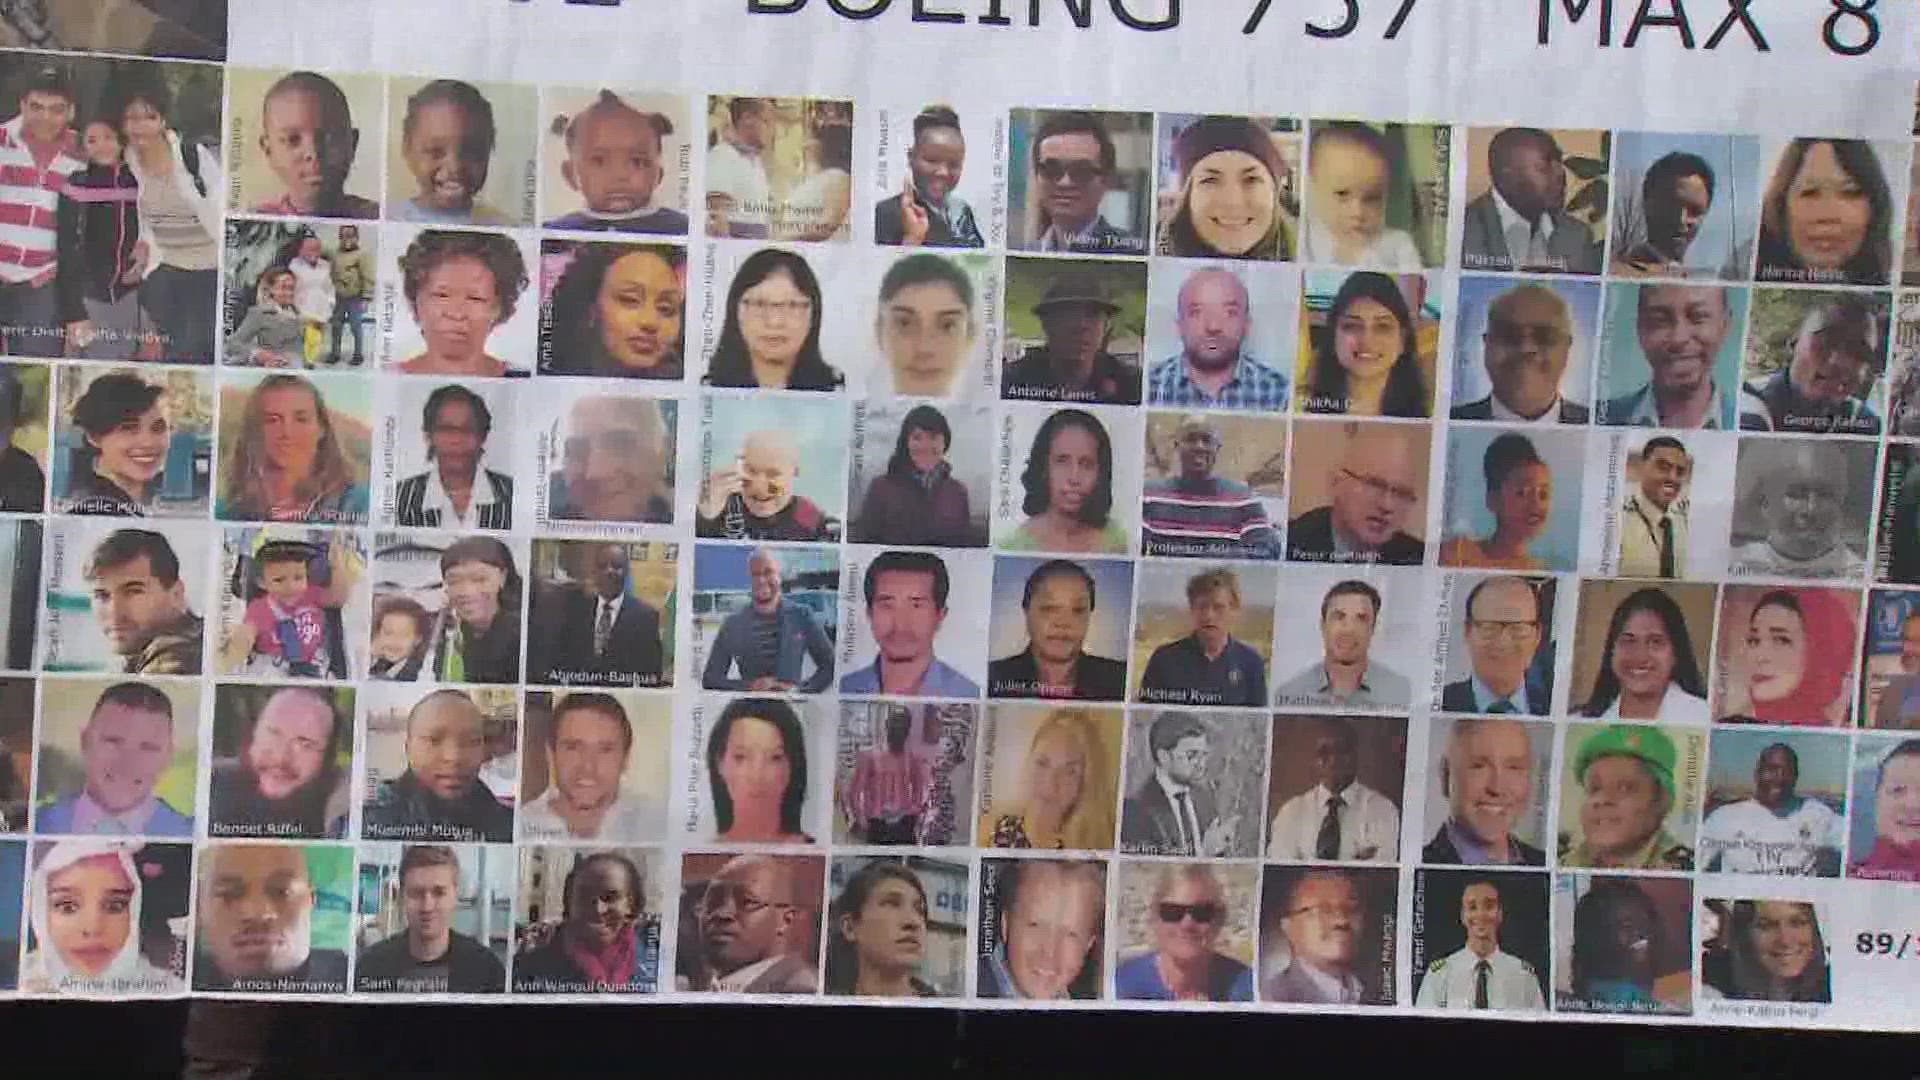 Families came from Connecticut, Kenya, London, Dublin, France and Canada to bear the emotional scars of losing family members to a 2019 Boeing Max 8 crash.